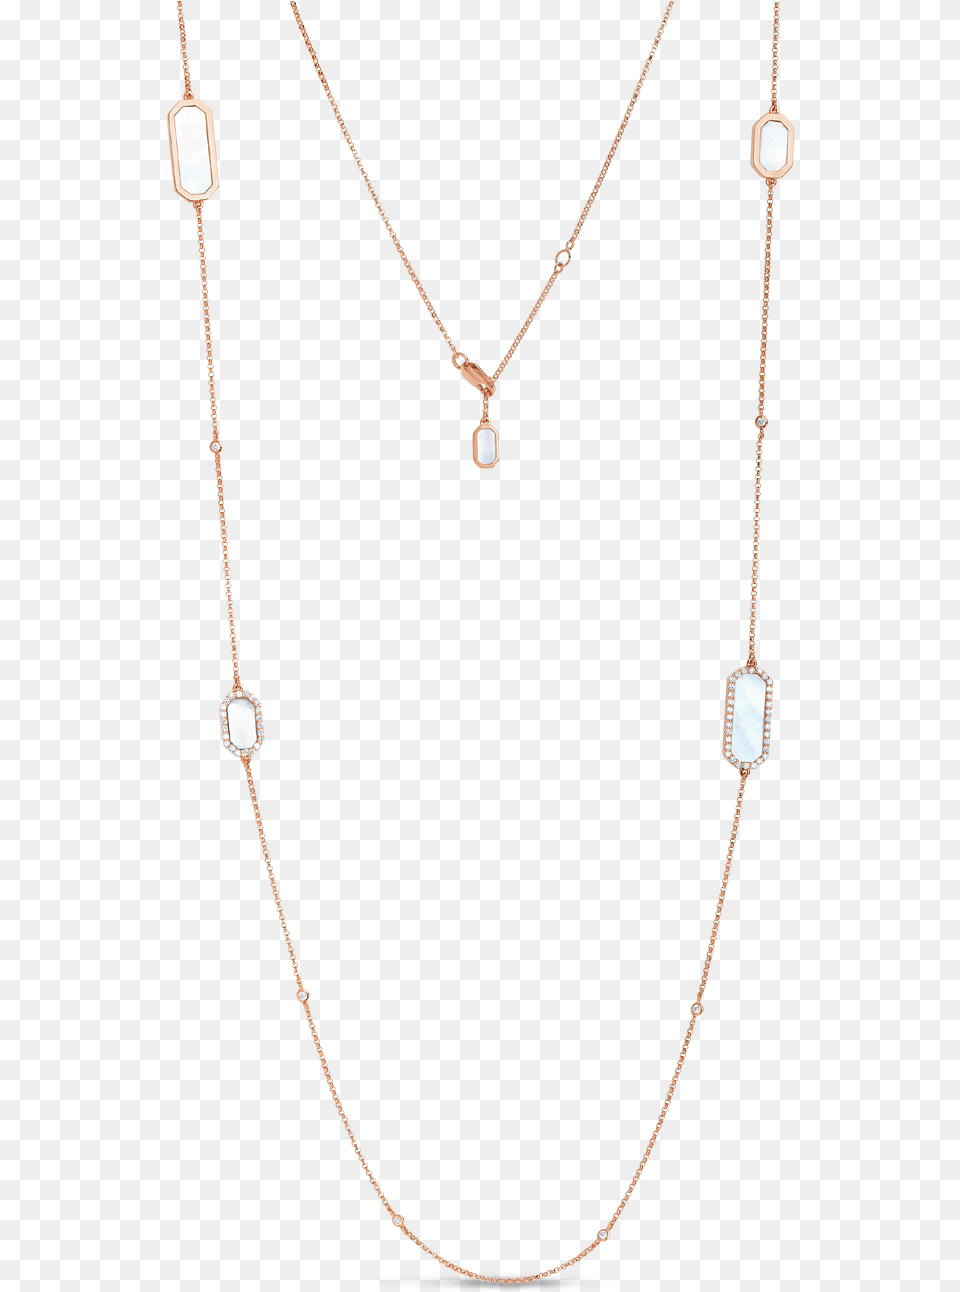 Roberto Coin Tiny Treasures 18k Rose Gold Art Necklace, Accessories, Jewelry, Diamond, Gemstone Free Png Download